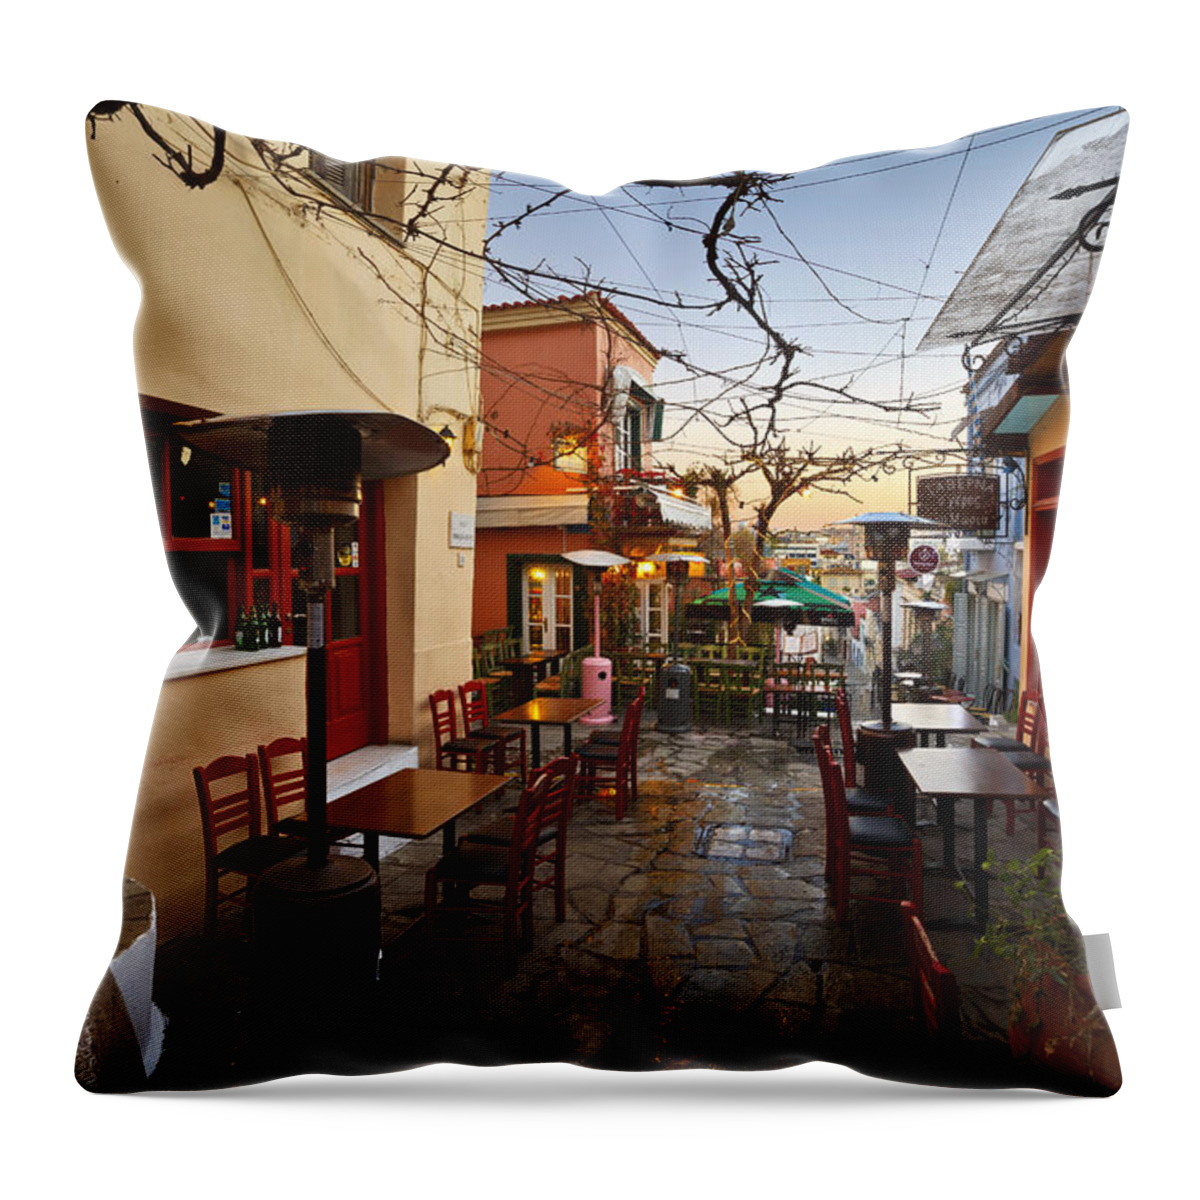 Plaka Throw Pillow featuring the photograph in Plaka by Milan Gonda